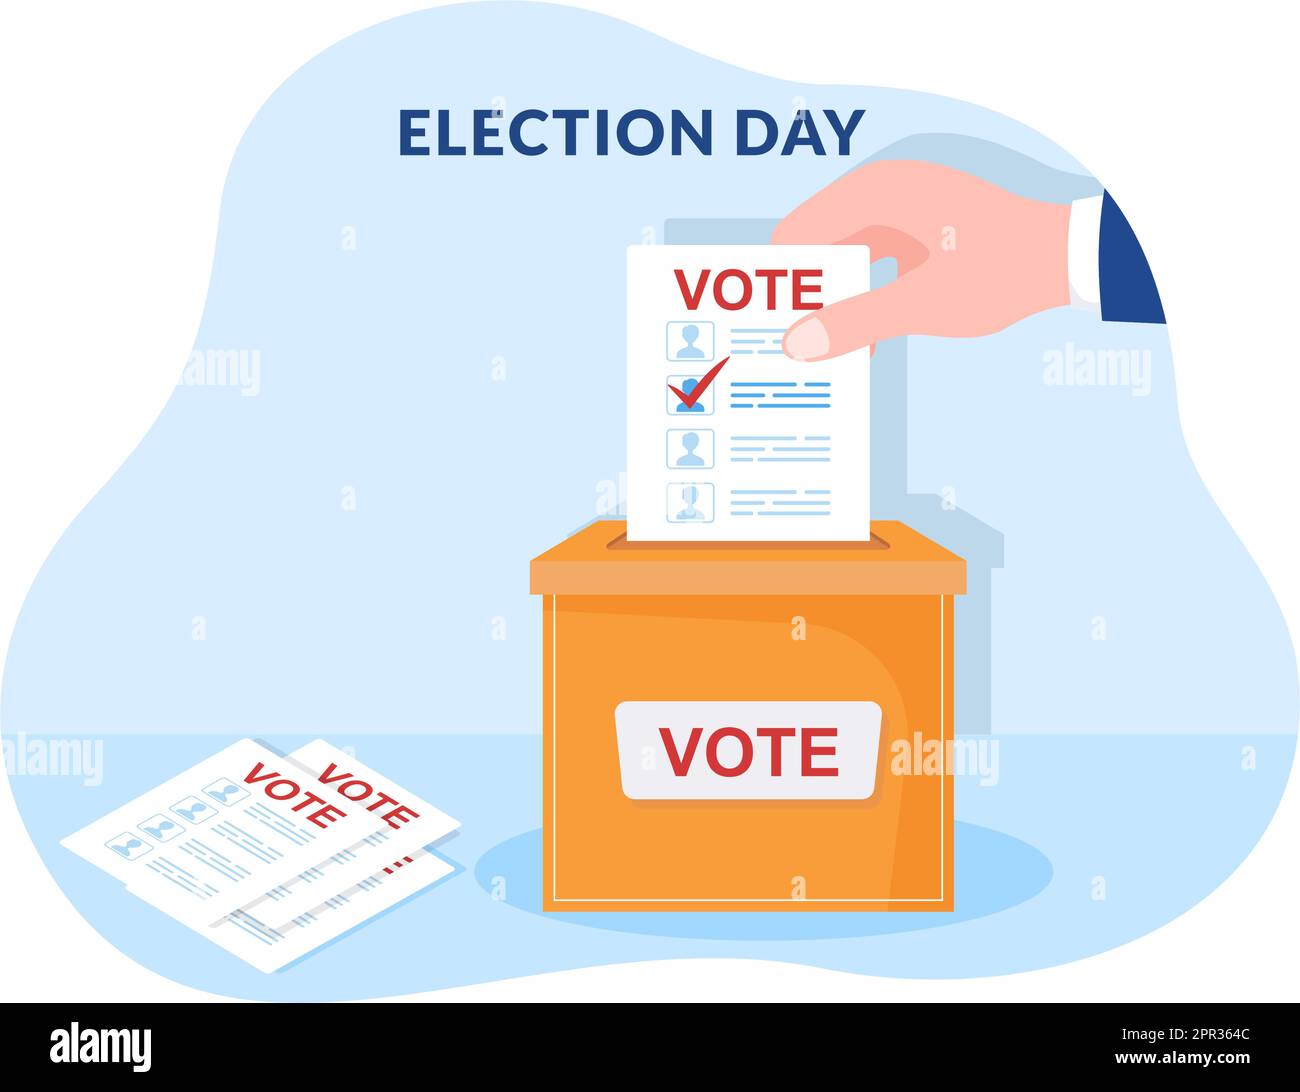 Election Day Political Hand Drawn Cartoon Flat Illustration with Voters Casting Ballots at Polling Place in United States Suitable for Poster or Campaign Stock Vector